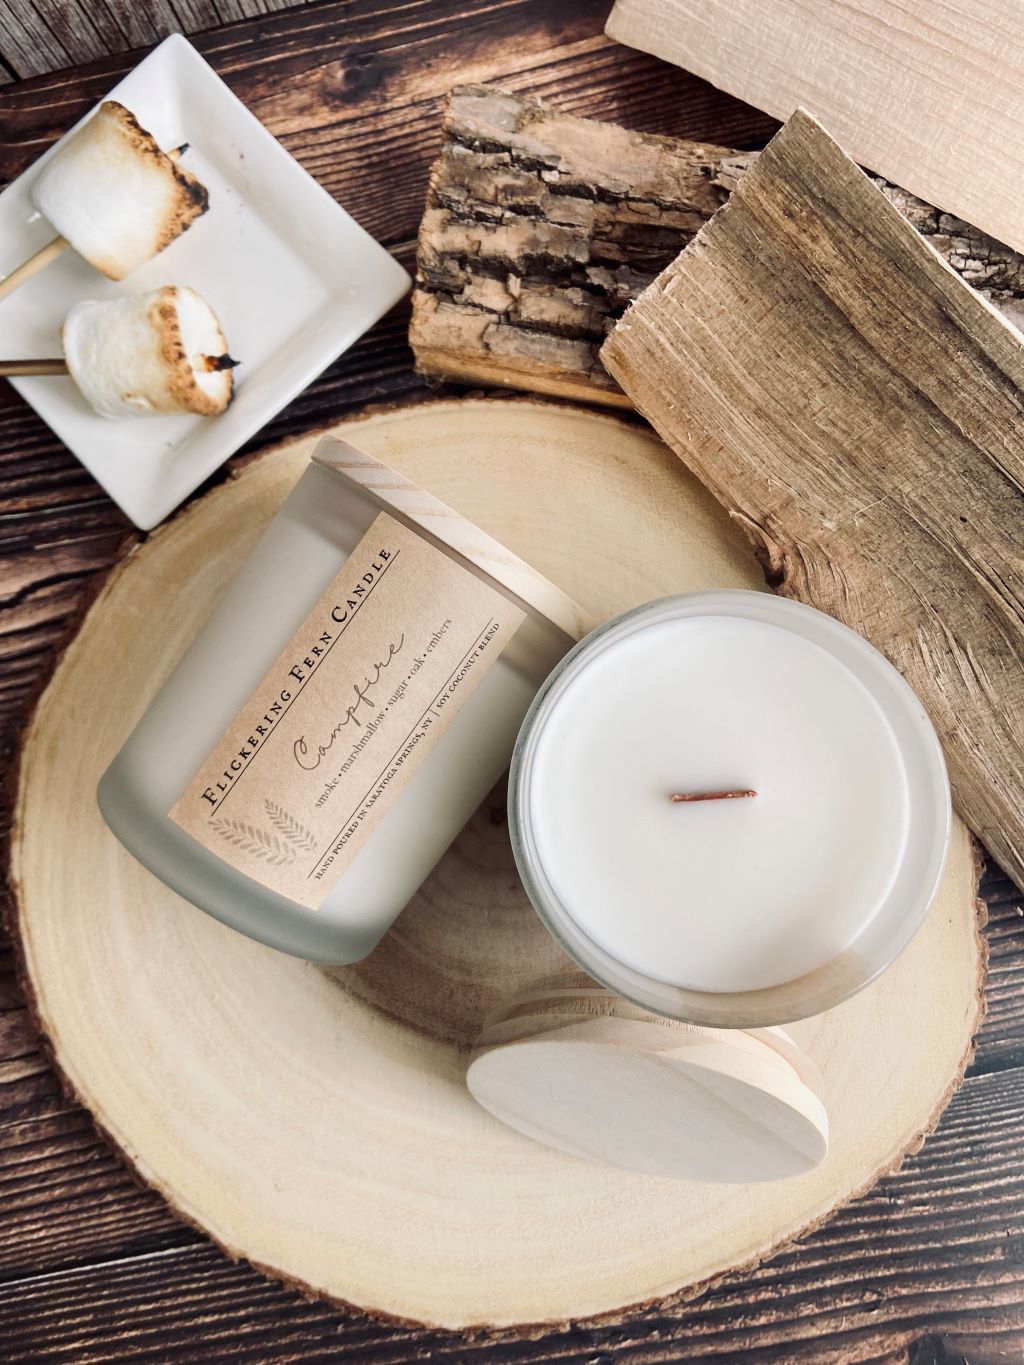 Campfire Wood Wick Candle – Flickering Fern Candle